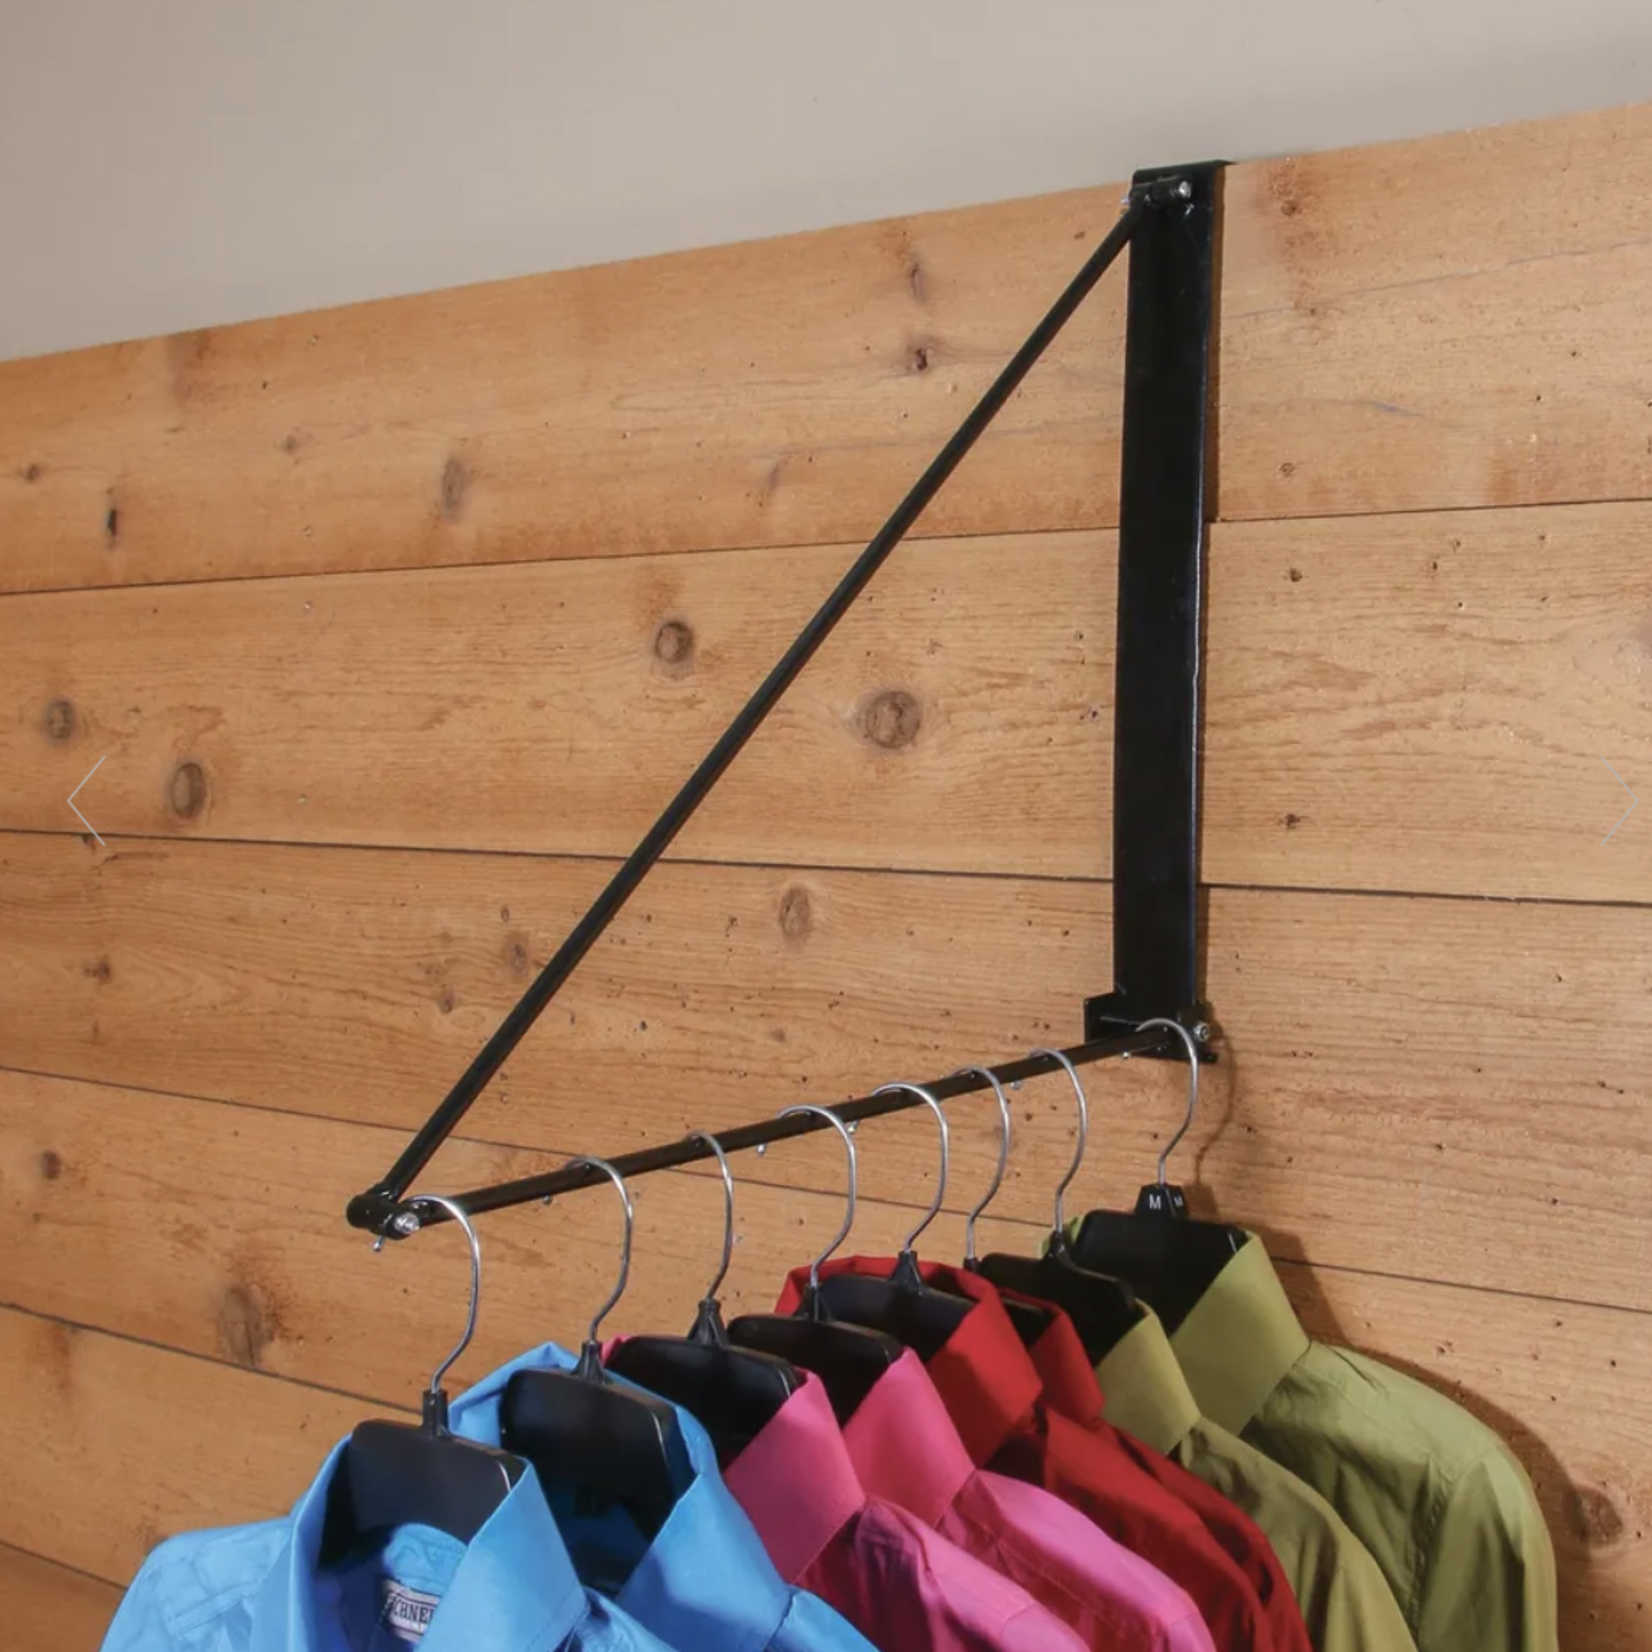 Easy Up Collapsible Clothing Hanger